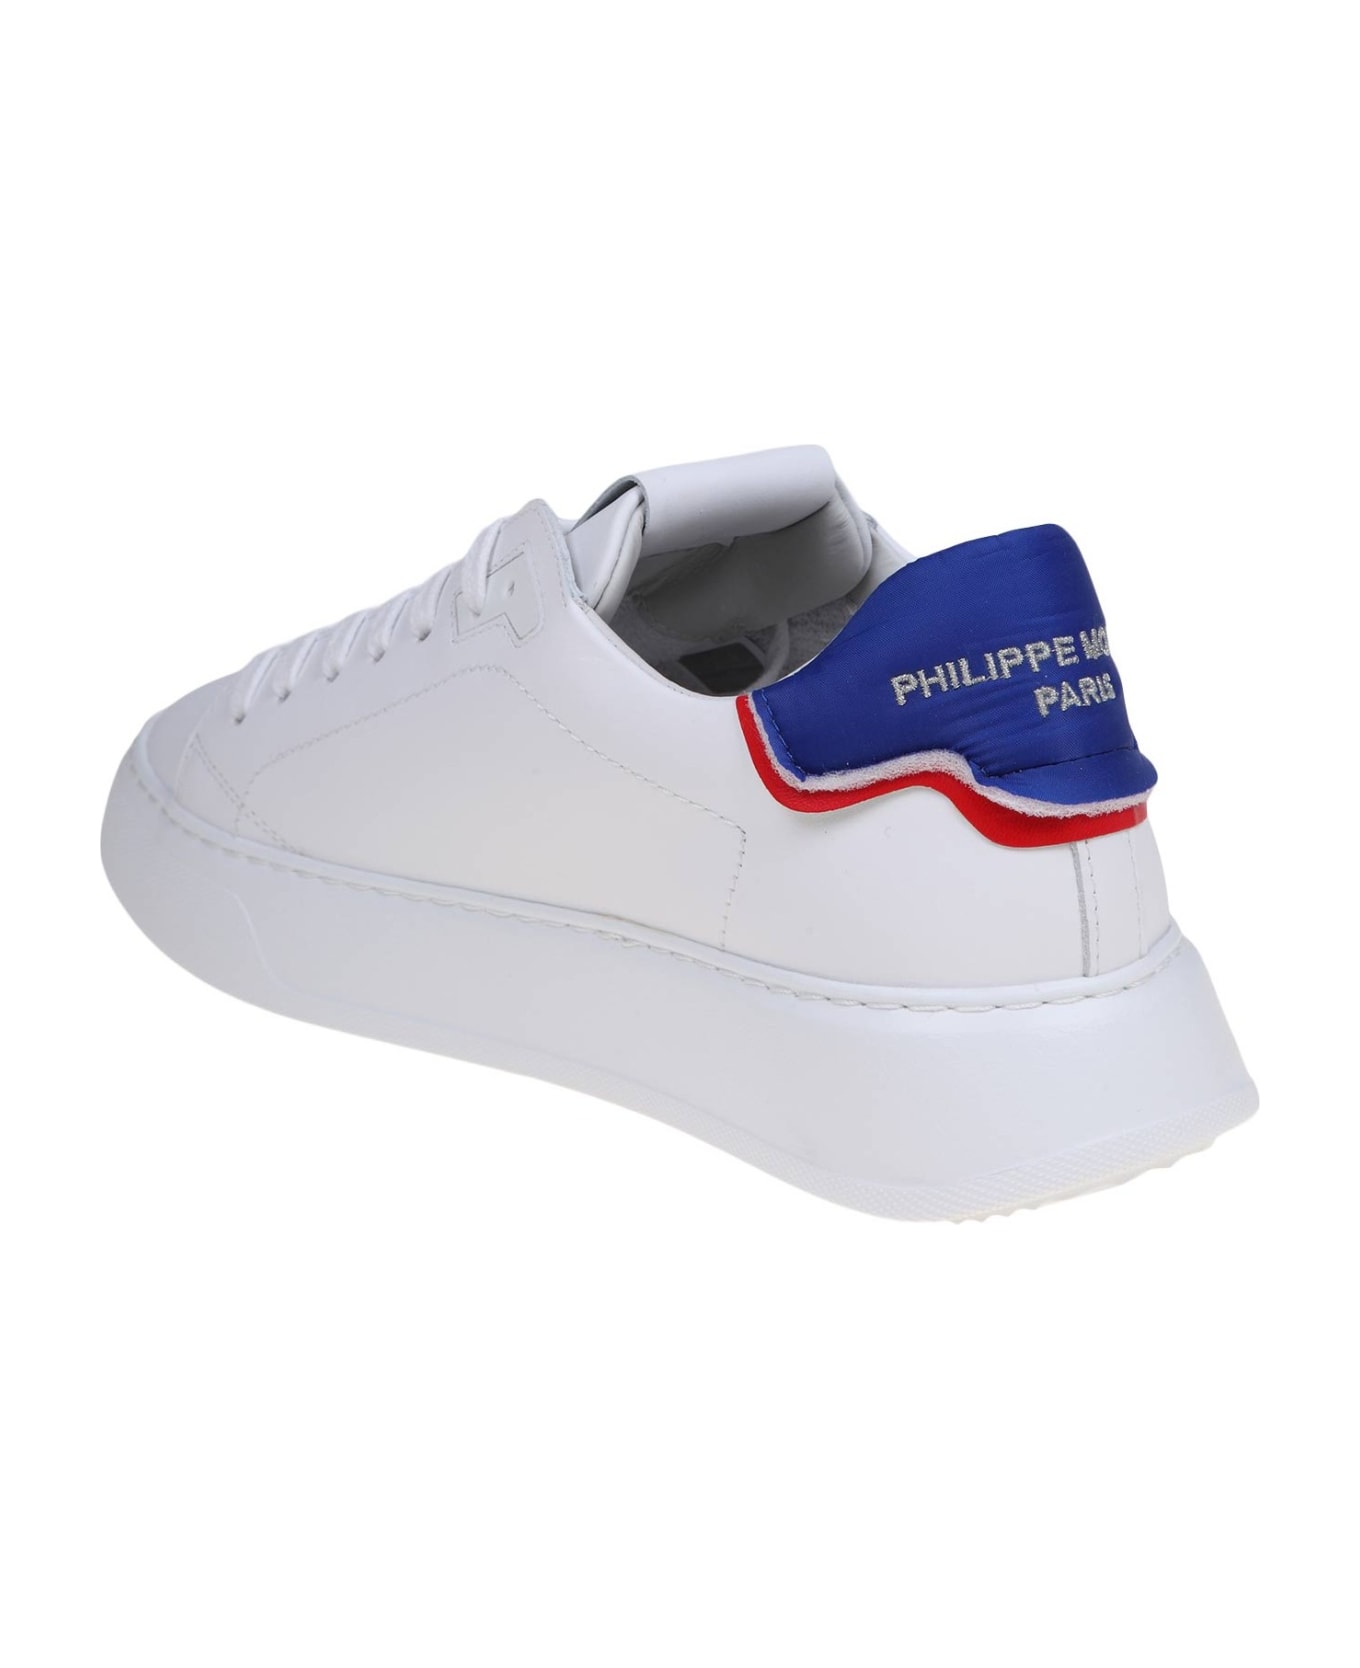 Philippe Model Temple Low Sneakers In White And Blue Leather - Blanc/bleu